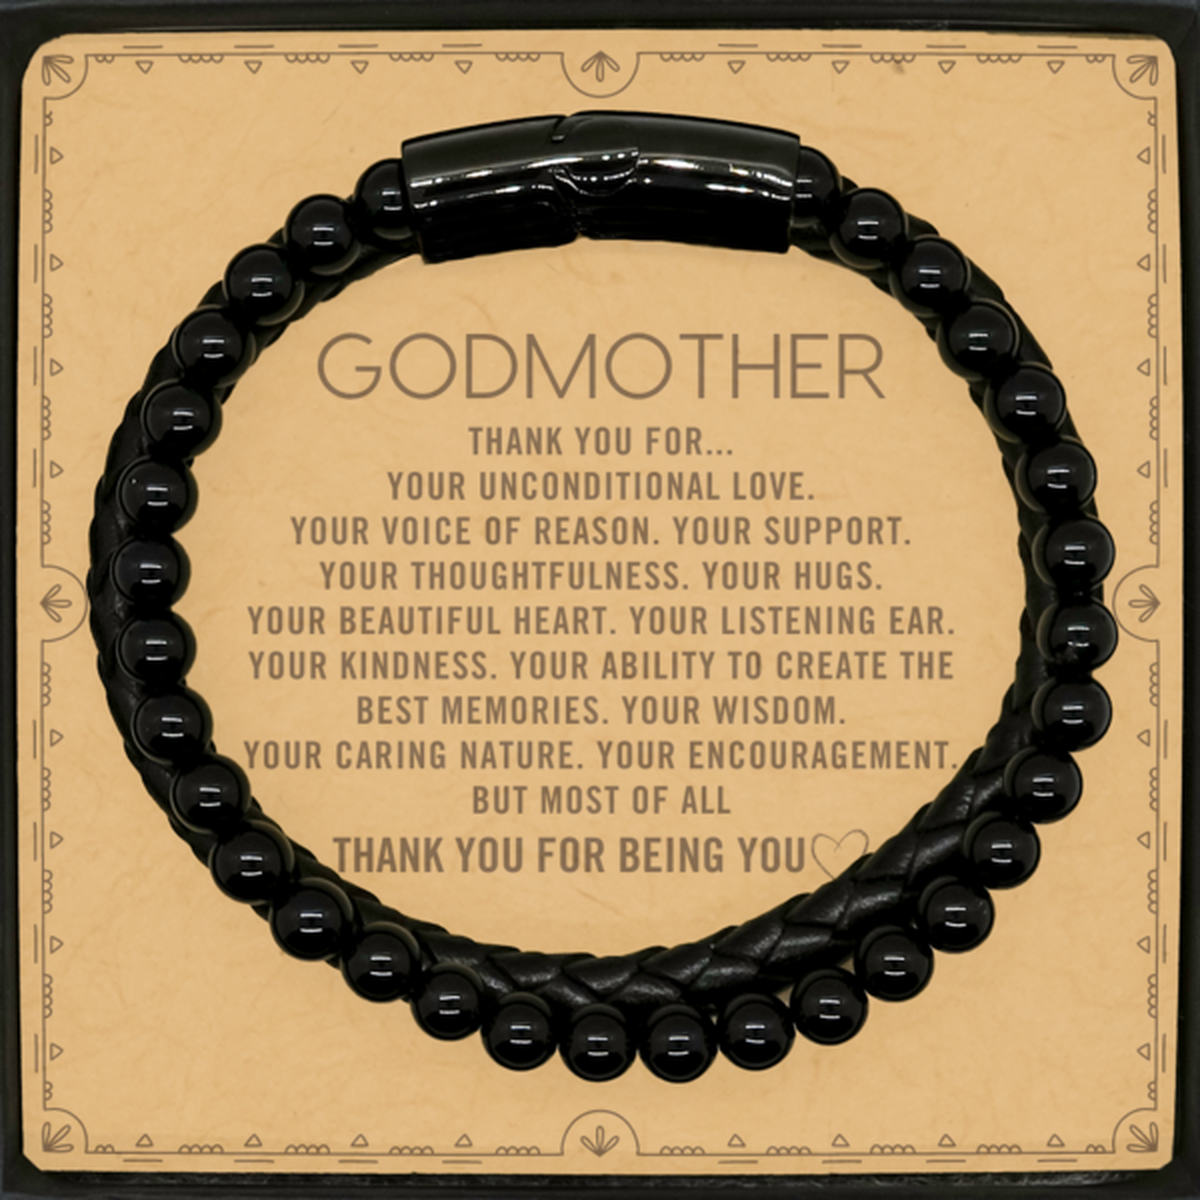 Godmother Stone Leather Bracelets Custom, Message Card Gifts For Godmother Christmas Graduation Birthday Gifts for Men Women Godmother Thank you for Your unconditional love